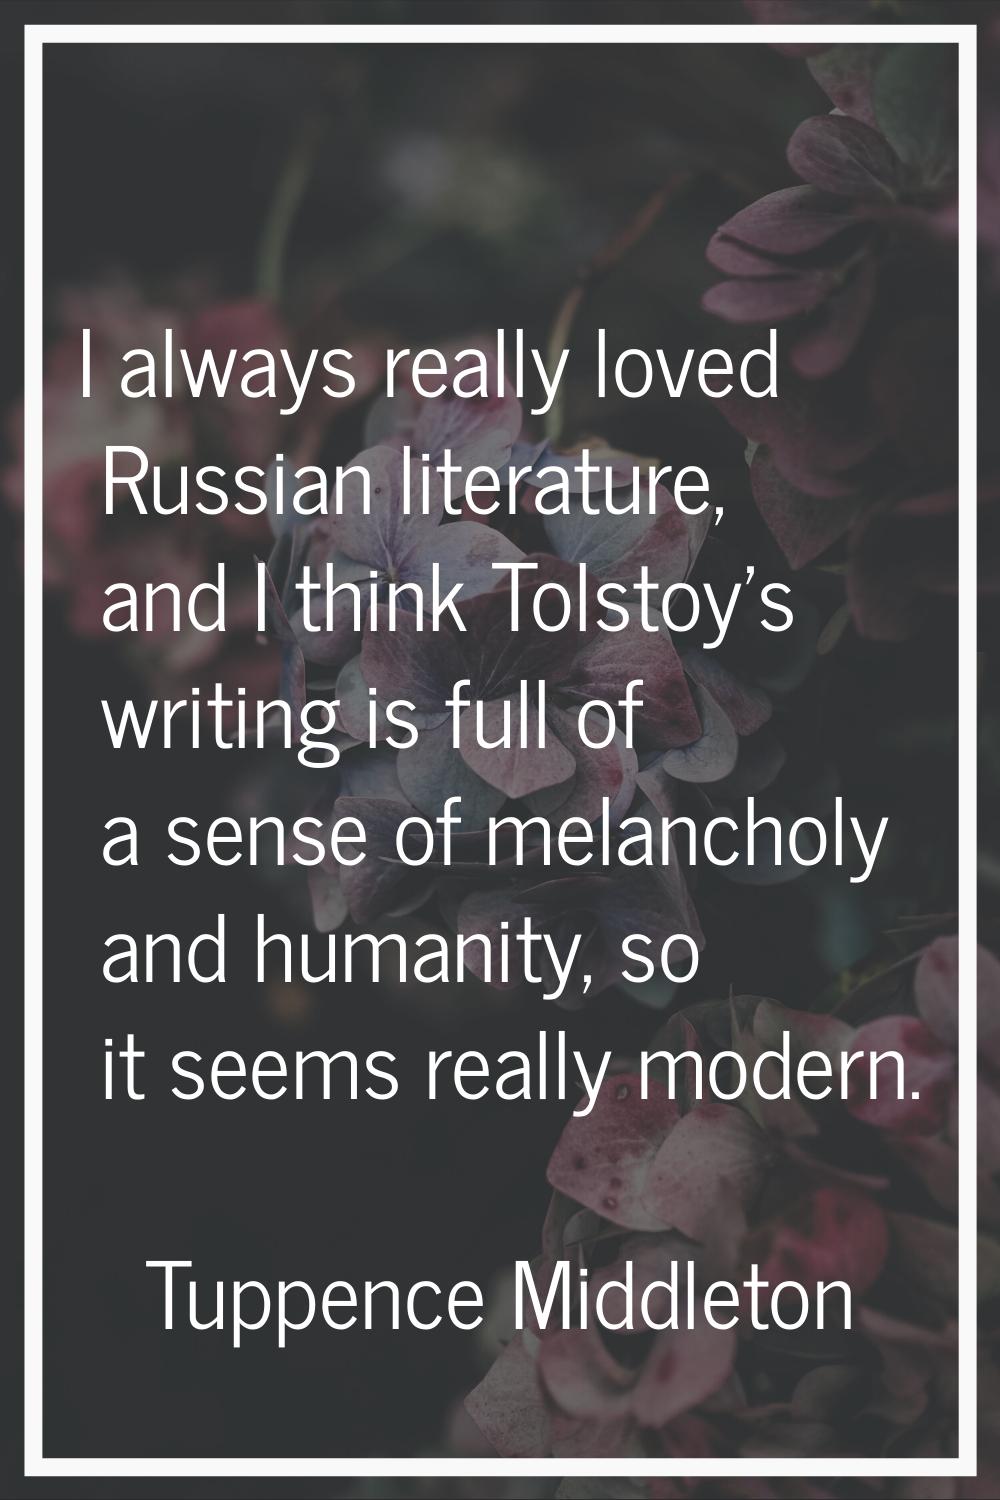 I always really loved Russian literature, and I think Tolstoy's writing is full of a sense of melan